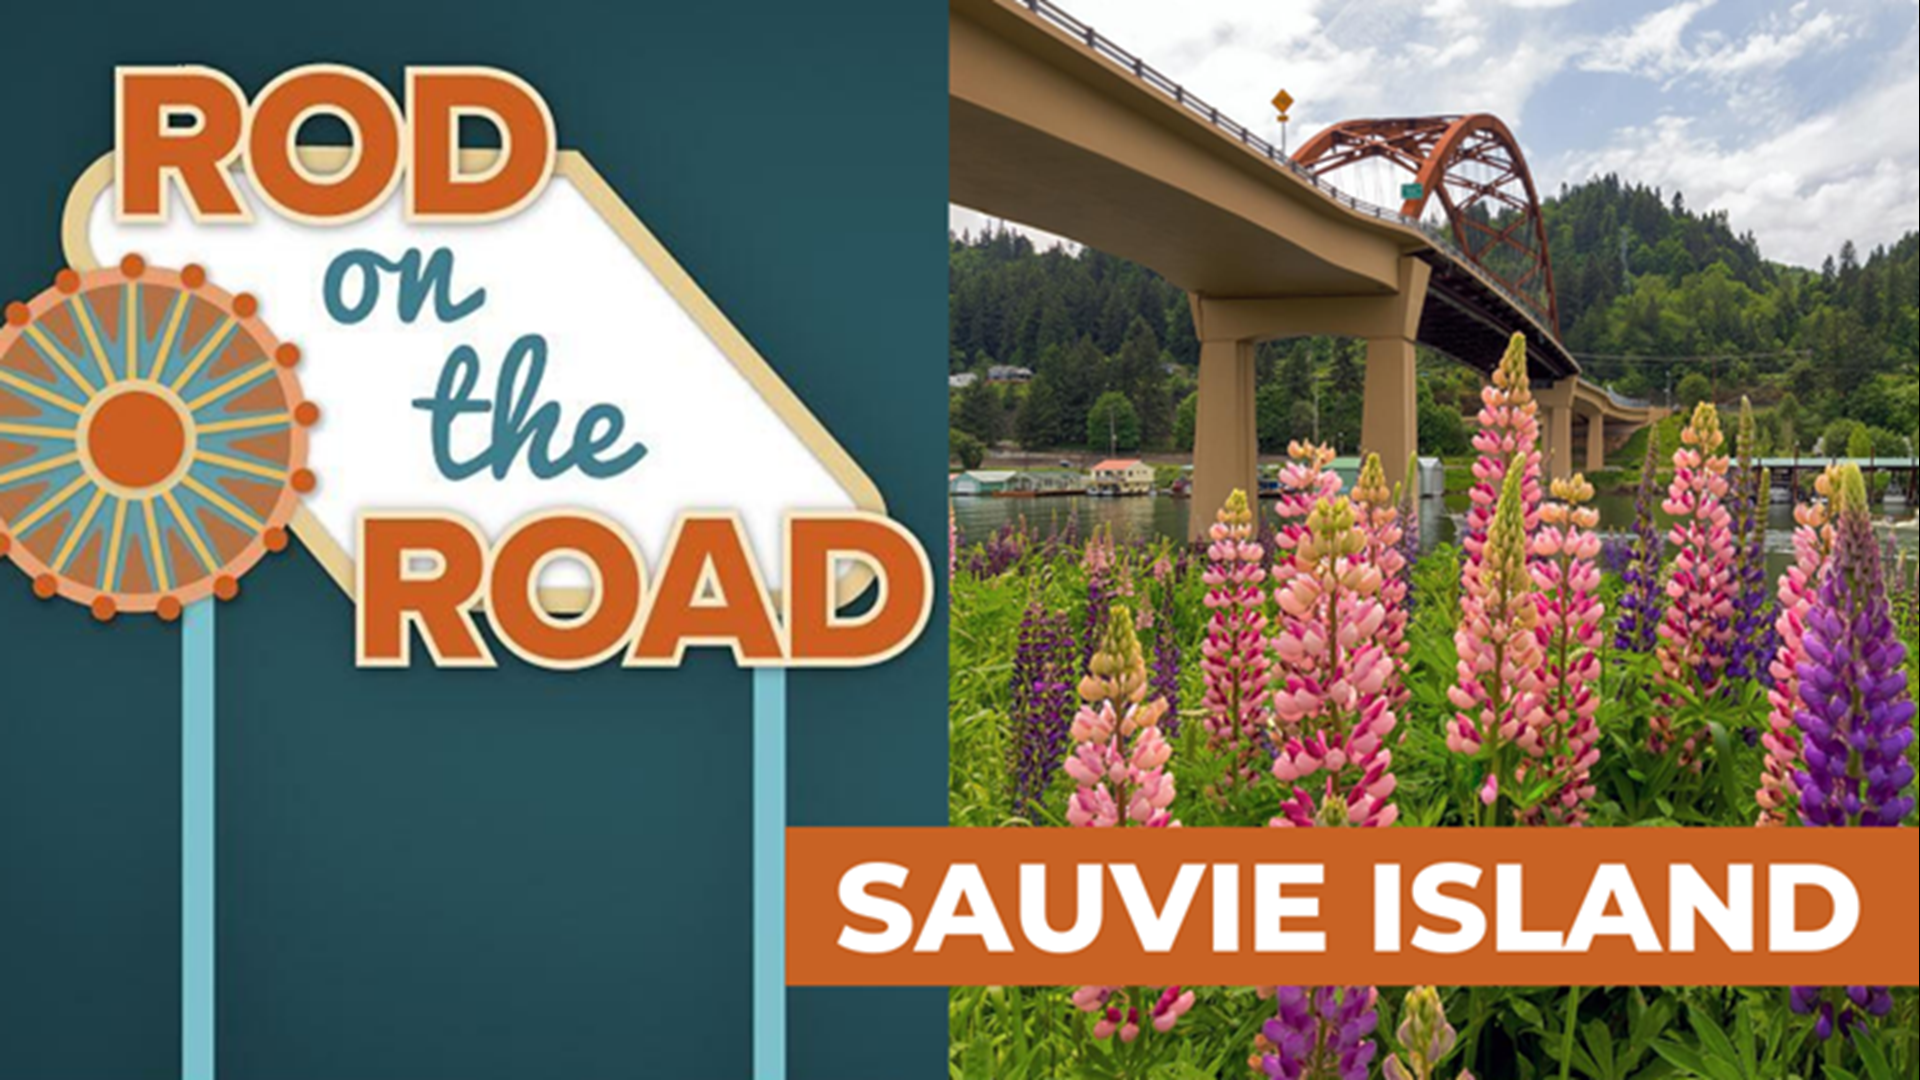 Fresh peaches, family farms and beautiful scenery made Sauvie Island one of Rod Hill's favorite visits yet.